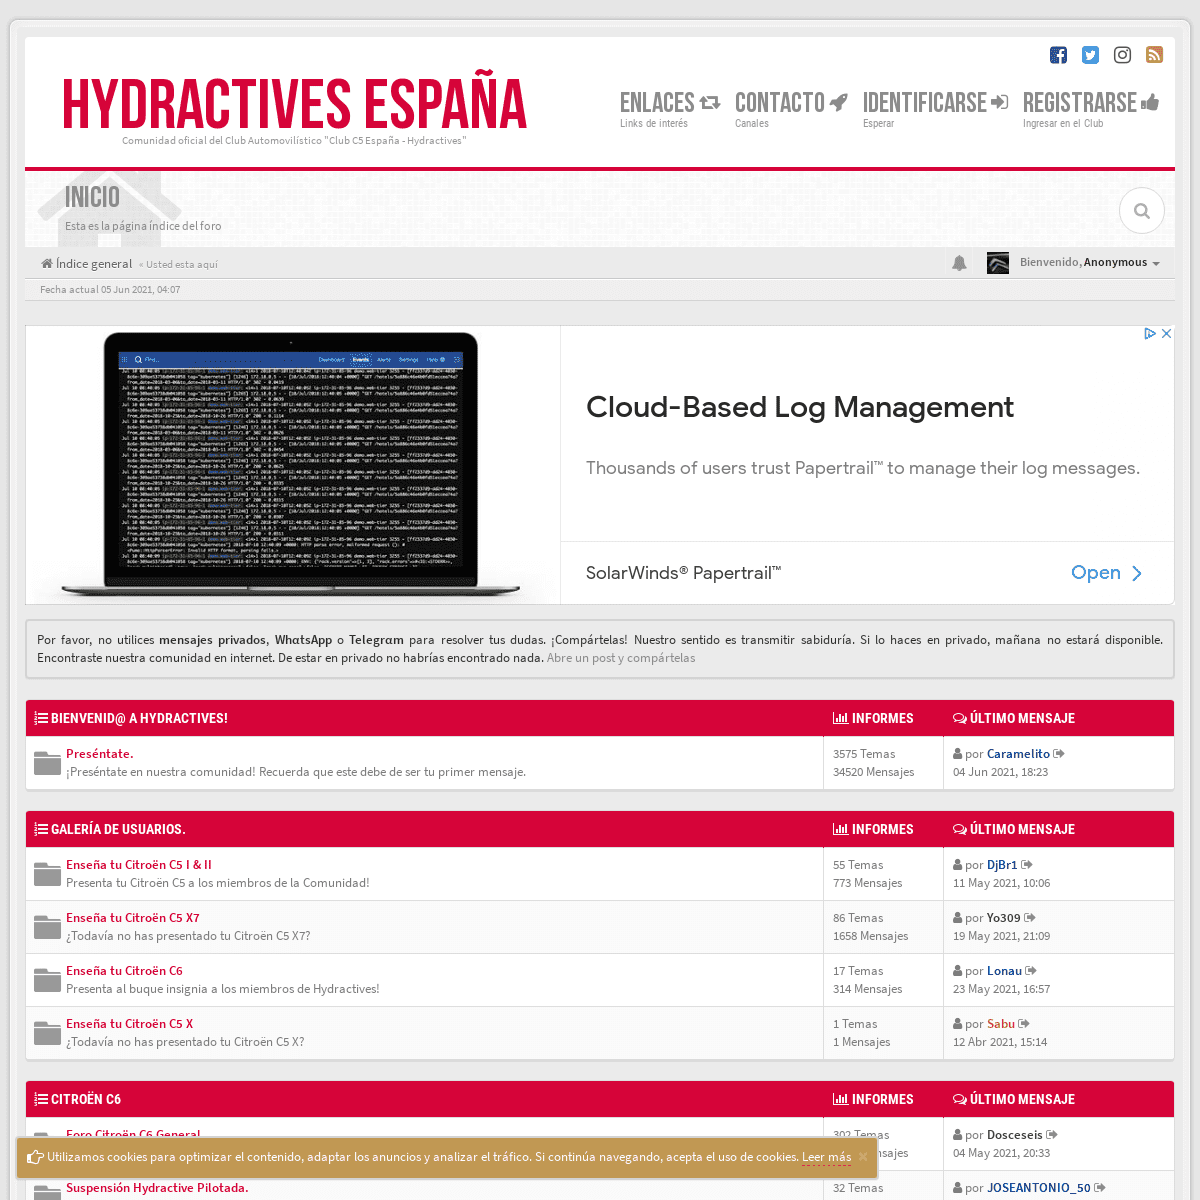 A complete backup of https://hydractives.com